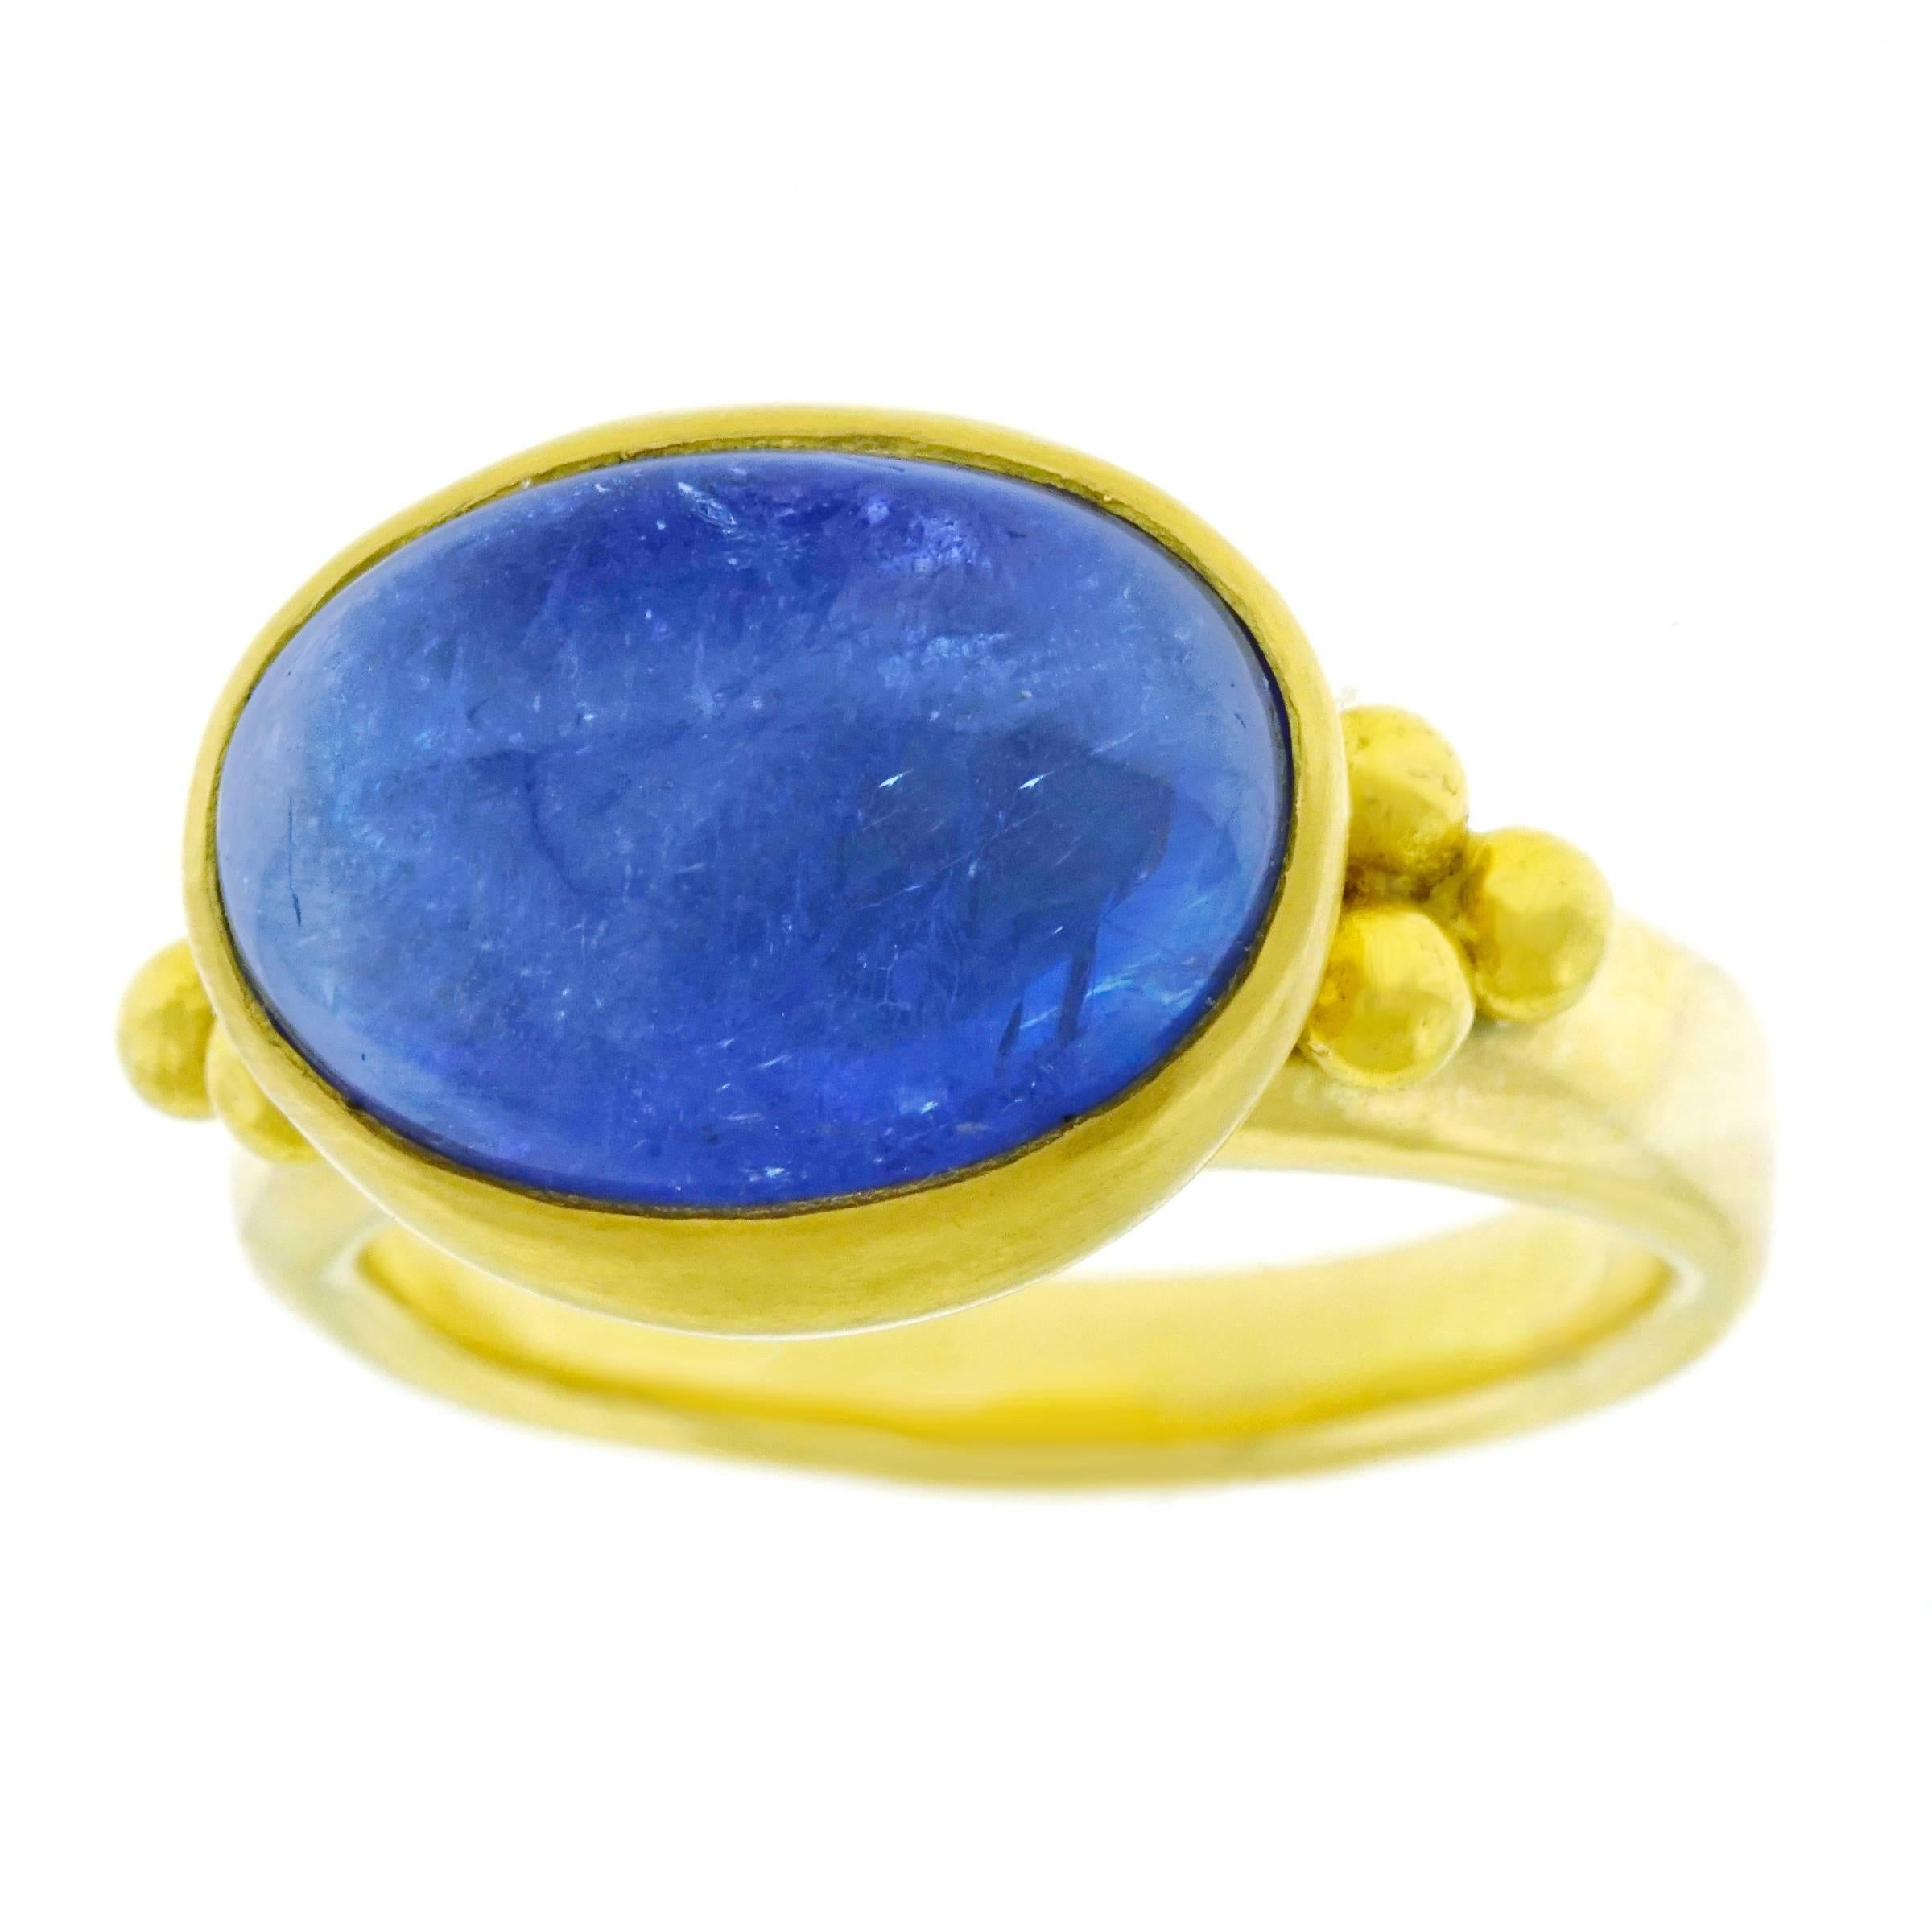 Circa 2000s, 22k/18k, Maija Neimanis, American.   This chic ring by Maija Neimanis is set with a vibrant tanzanite cabochon in polished high-karat yellow gold. Schooled in ancient techniques, Neimanis makes Byzantine-inspired design contemporary